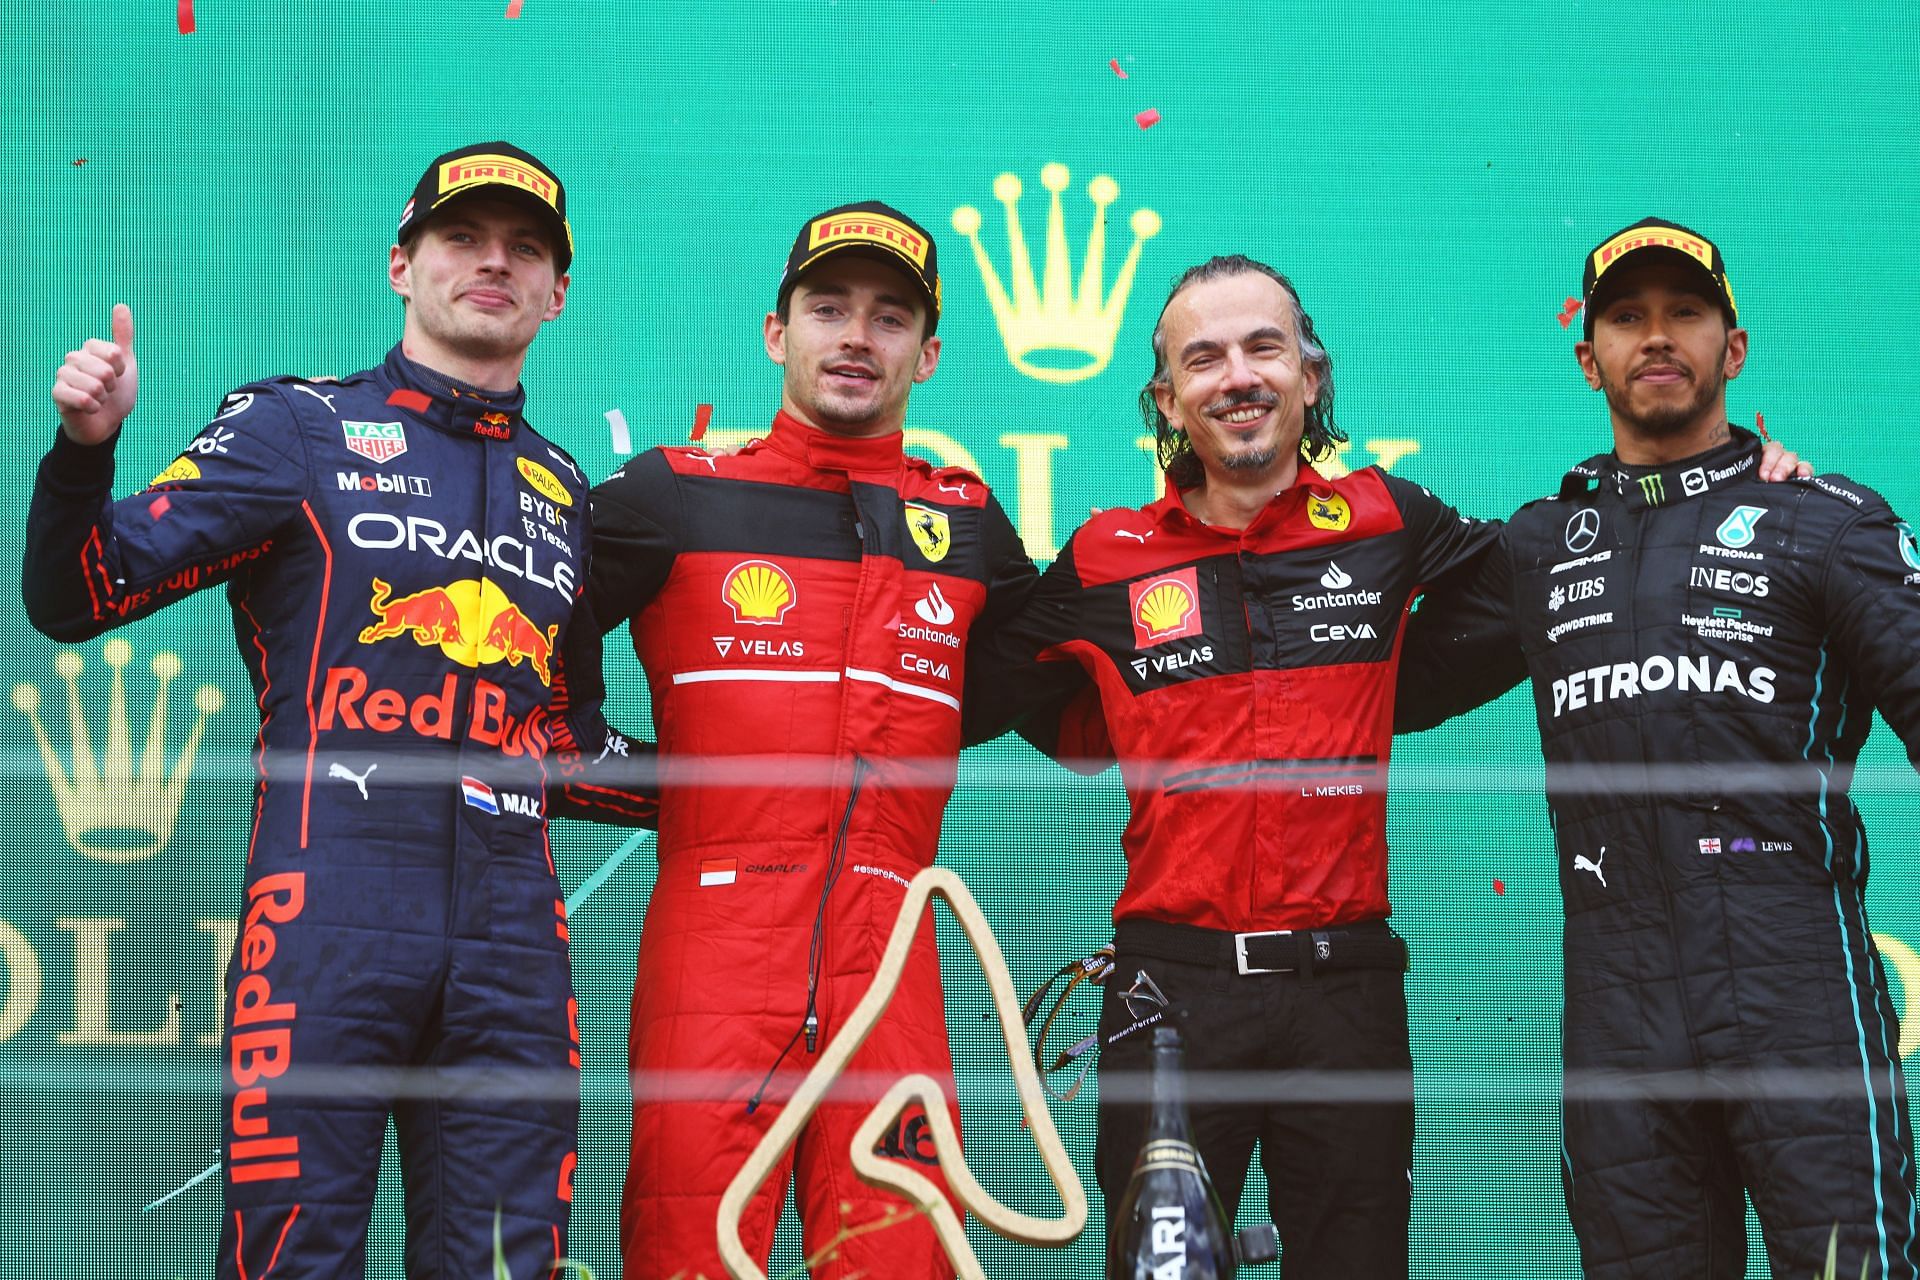 From L to R: Red Bull&#039;s Max Verstappen, Ferrari&#039;s Charles Leclerc and Laurent Mekies, and Mercedes&#039; Lewis Hamilton on the podium at the 2022 F1 Austrian GP (Photo by Clive Rose/Getty Images)